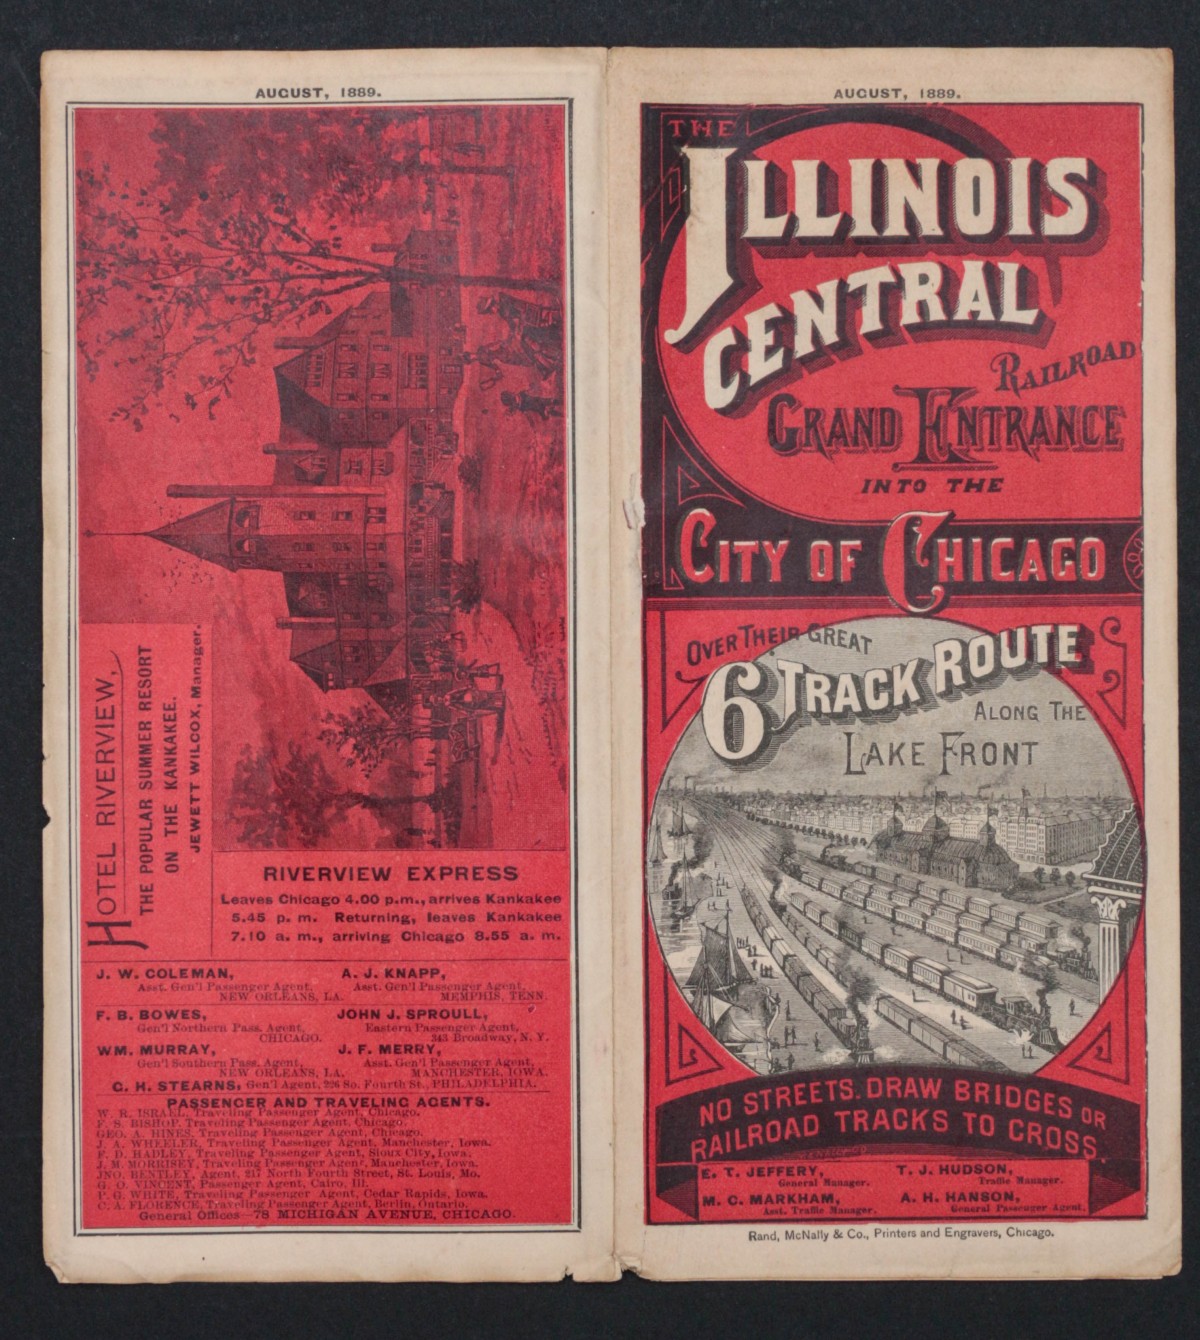 ILLINOIS CENTRAL RAILROAD TIMETABLE FOR AUGUST 1889